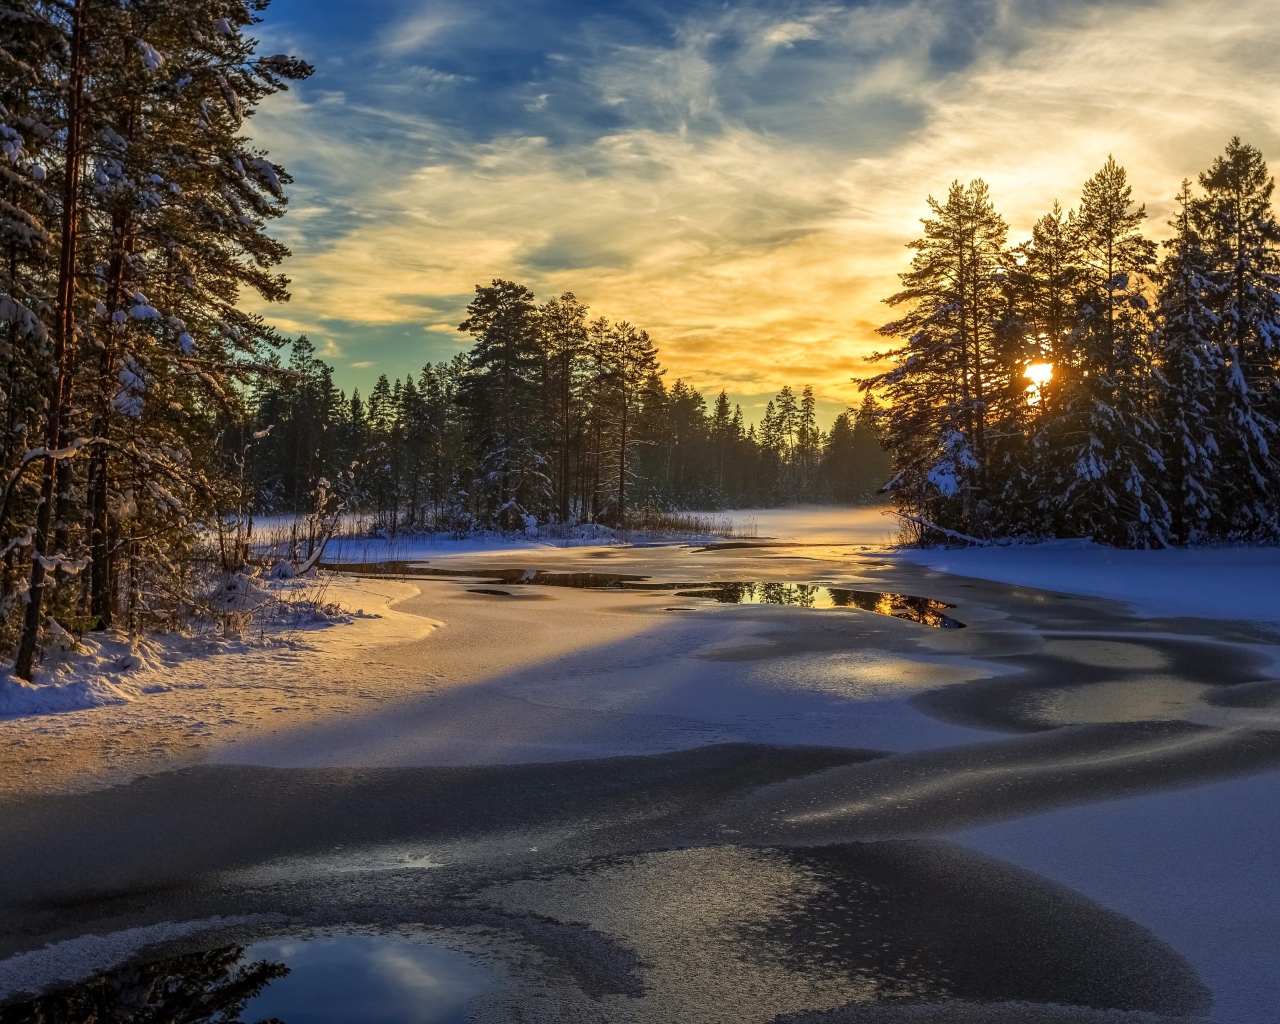 An ice-covered river with snow-covered firs along the banks at dawn